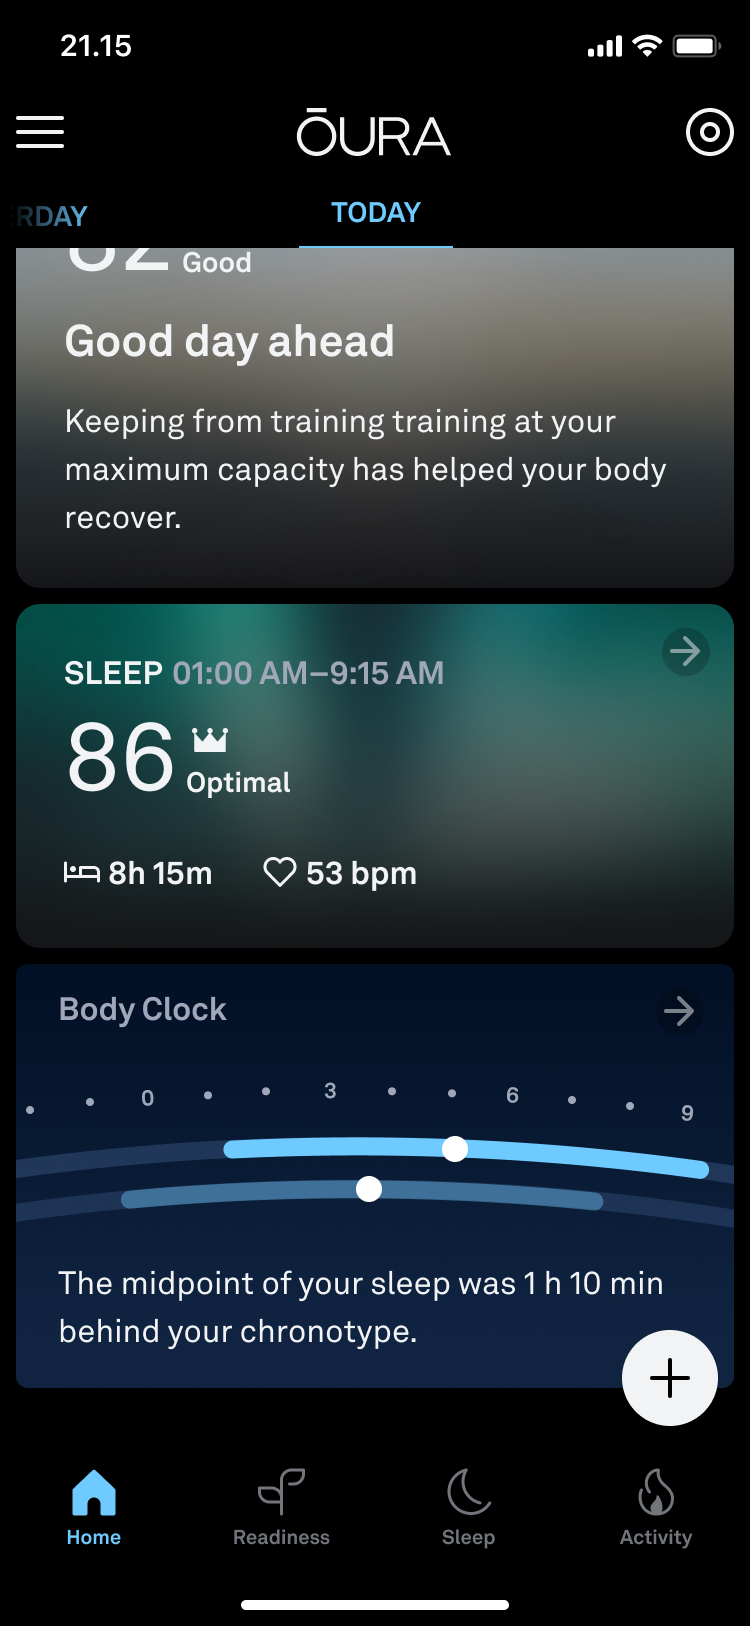 the collapsed version of the Body Clock as it appears on the Oura App's Home tab